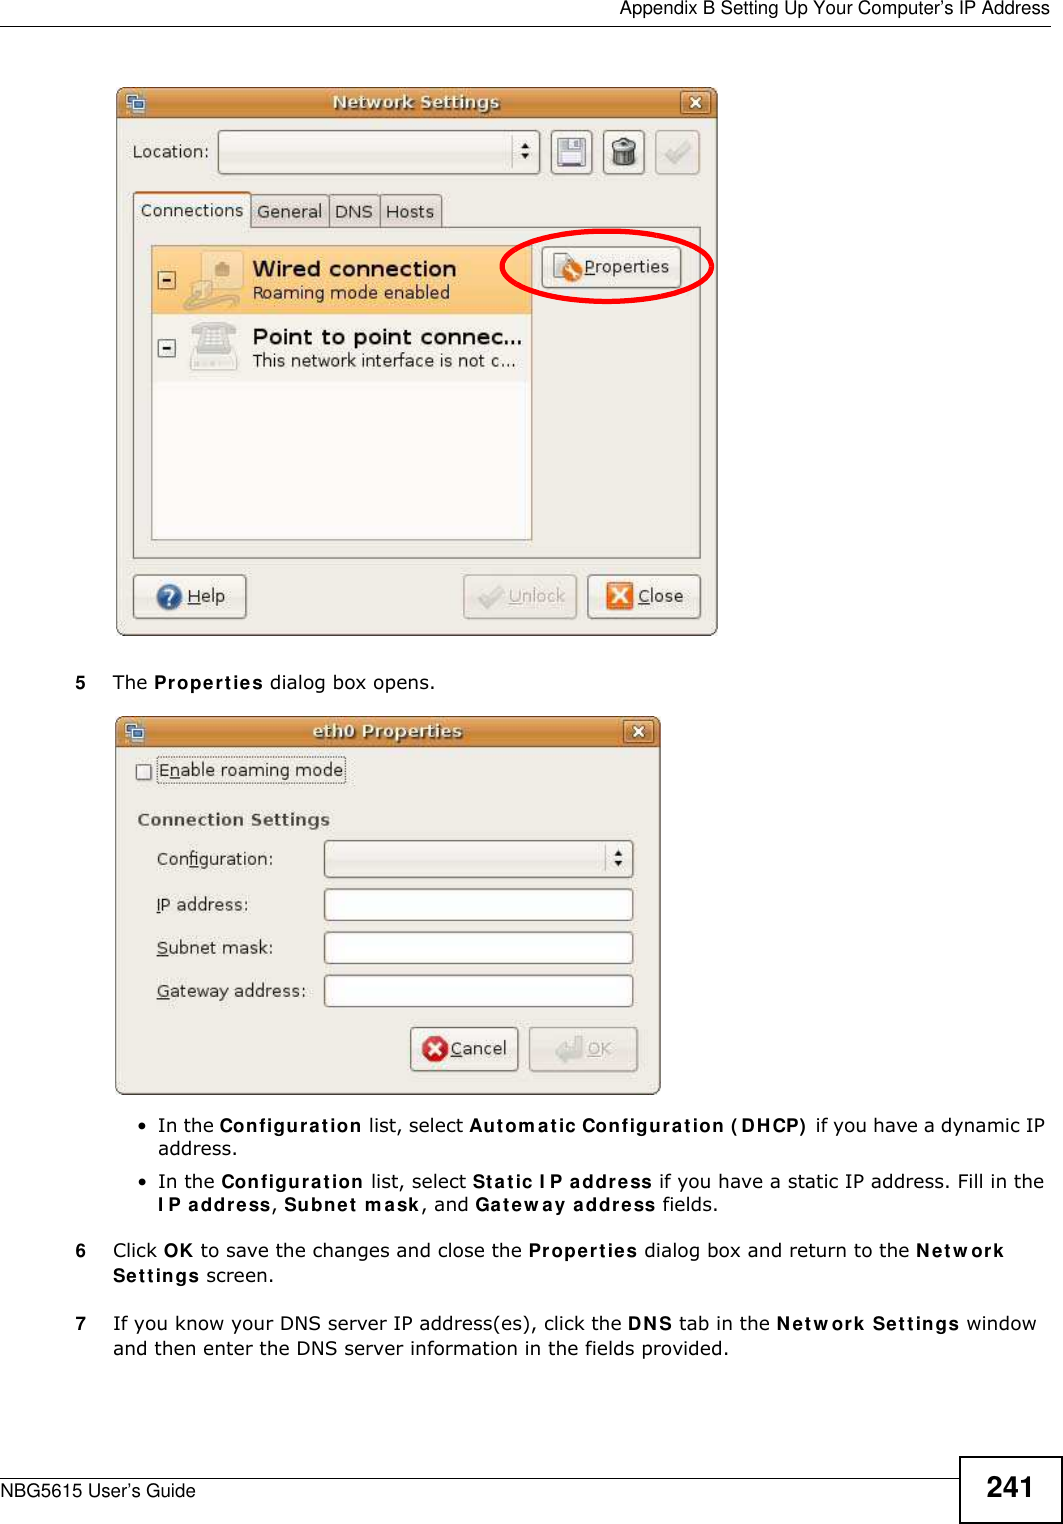  Appendix B Setting Up Your Computer’s IP AddressNBG5615 User’s Guide 2415The Properties dialog box opens.•In the Configuration list, select Autom atic Configuration ( DHCP)  if you have a dynamic IP address.•In the Configuration list, select Static I P address if you have a static IP address. Fill in the I P address, Subnet m ask, and Gatew ay address fields. 6Click OK to save the changes and close the Properties dialog box and return to the Netw ork Settings screen. 7If you know your DNS server IP address(es), click the DNS tab in the Netw ork Settings window and then enter the DNS server information in the fields provided. 